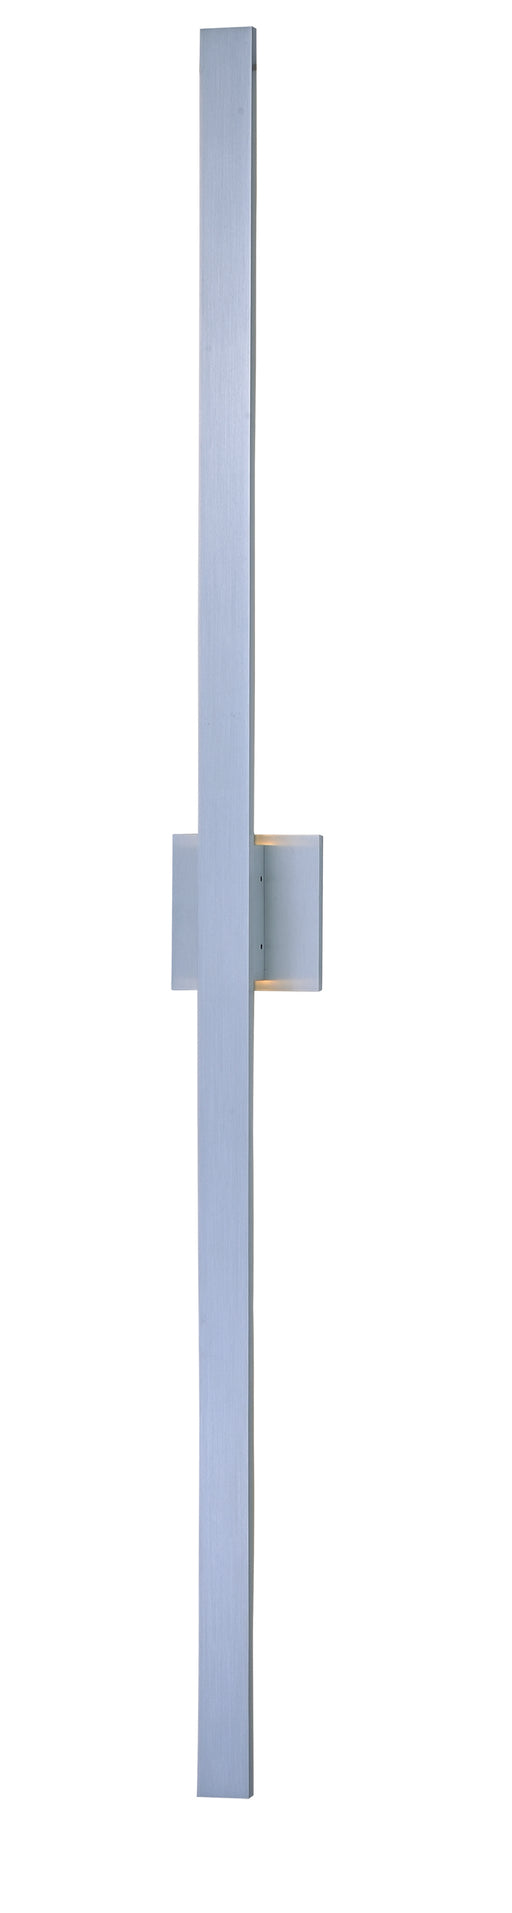 Alumilux: Line LED Outdoor Wall Sconce in Satin Aluminum